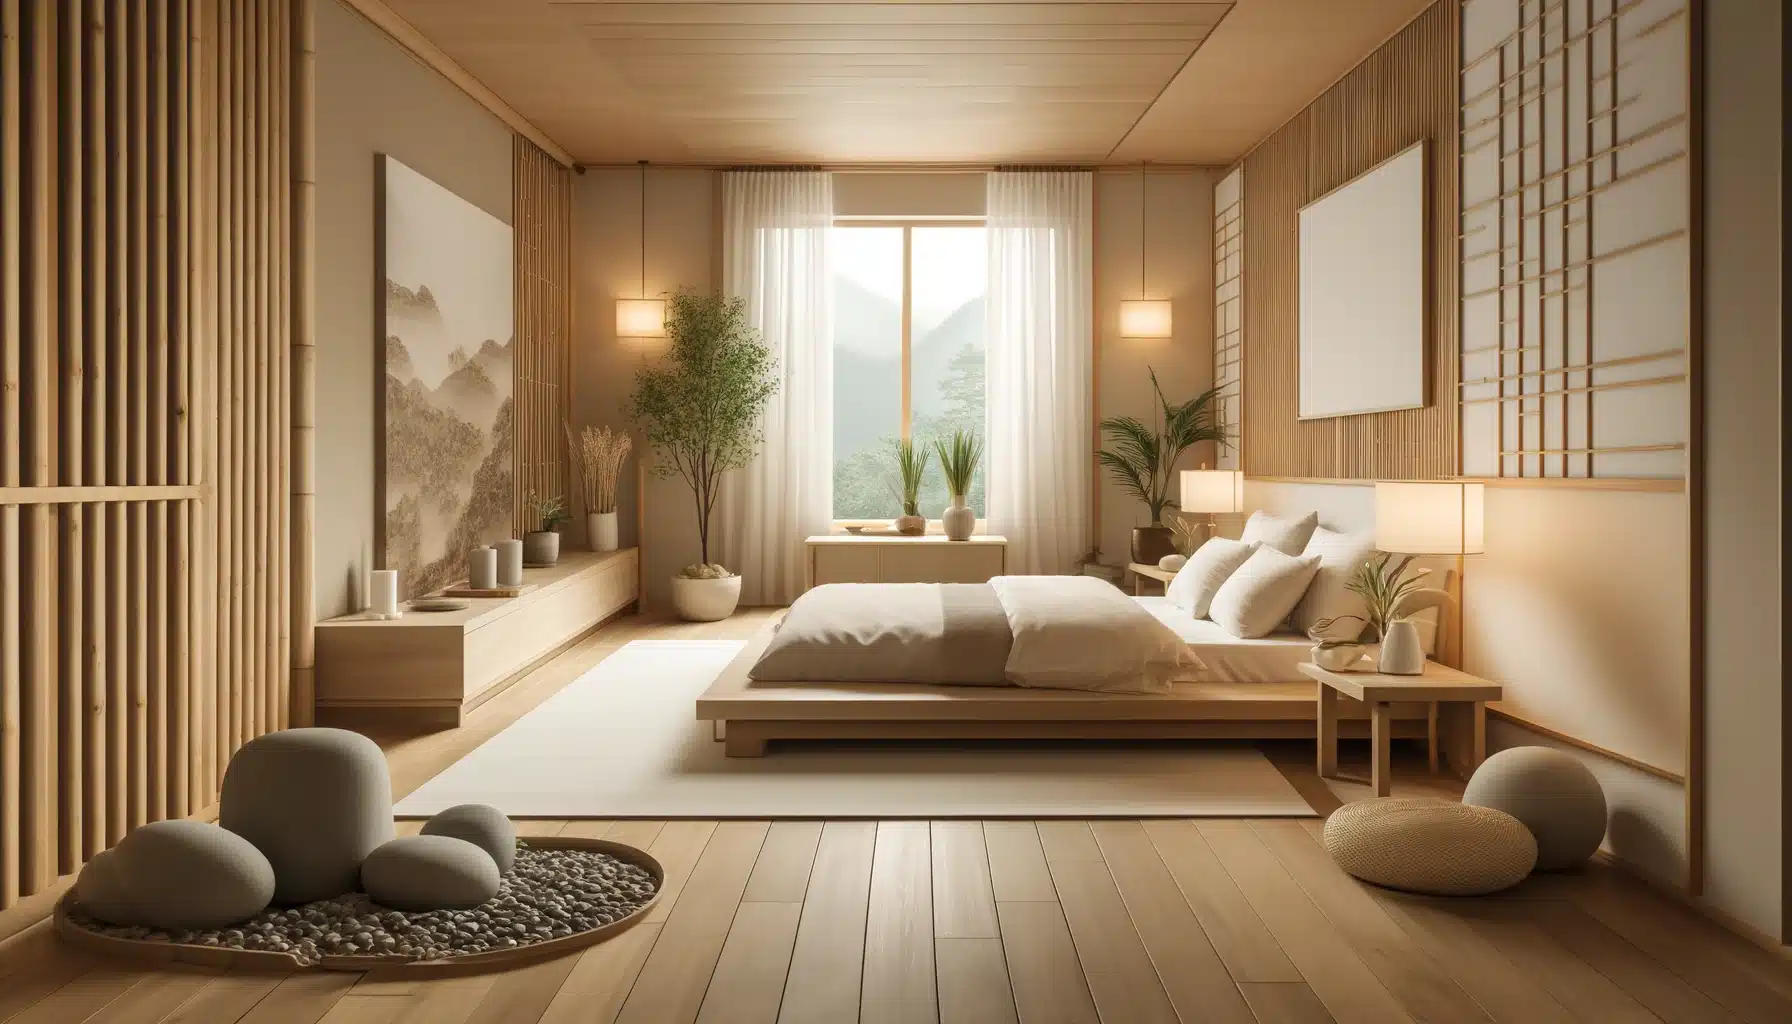 A serene and calming Zen bedroom layout. The room should feature a minimalist design with a focus on natural materials and a soothing color palette. Elements such as a low platform bed, simple bedding, bamboo or wooden accents, and plenty of natural light from large windows should be included. The decor should include Zen-inspired elements like a small indoor water fountain, pebbles, and subtle greenery to enhance the peaceful atmosphere. The room should embody tranquility and simplicity, ideal for meditation and relaxation